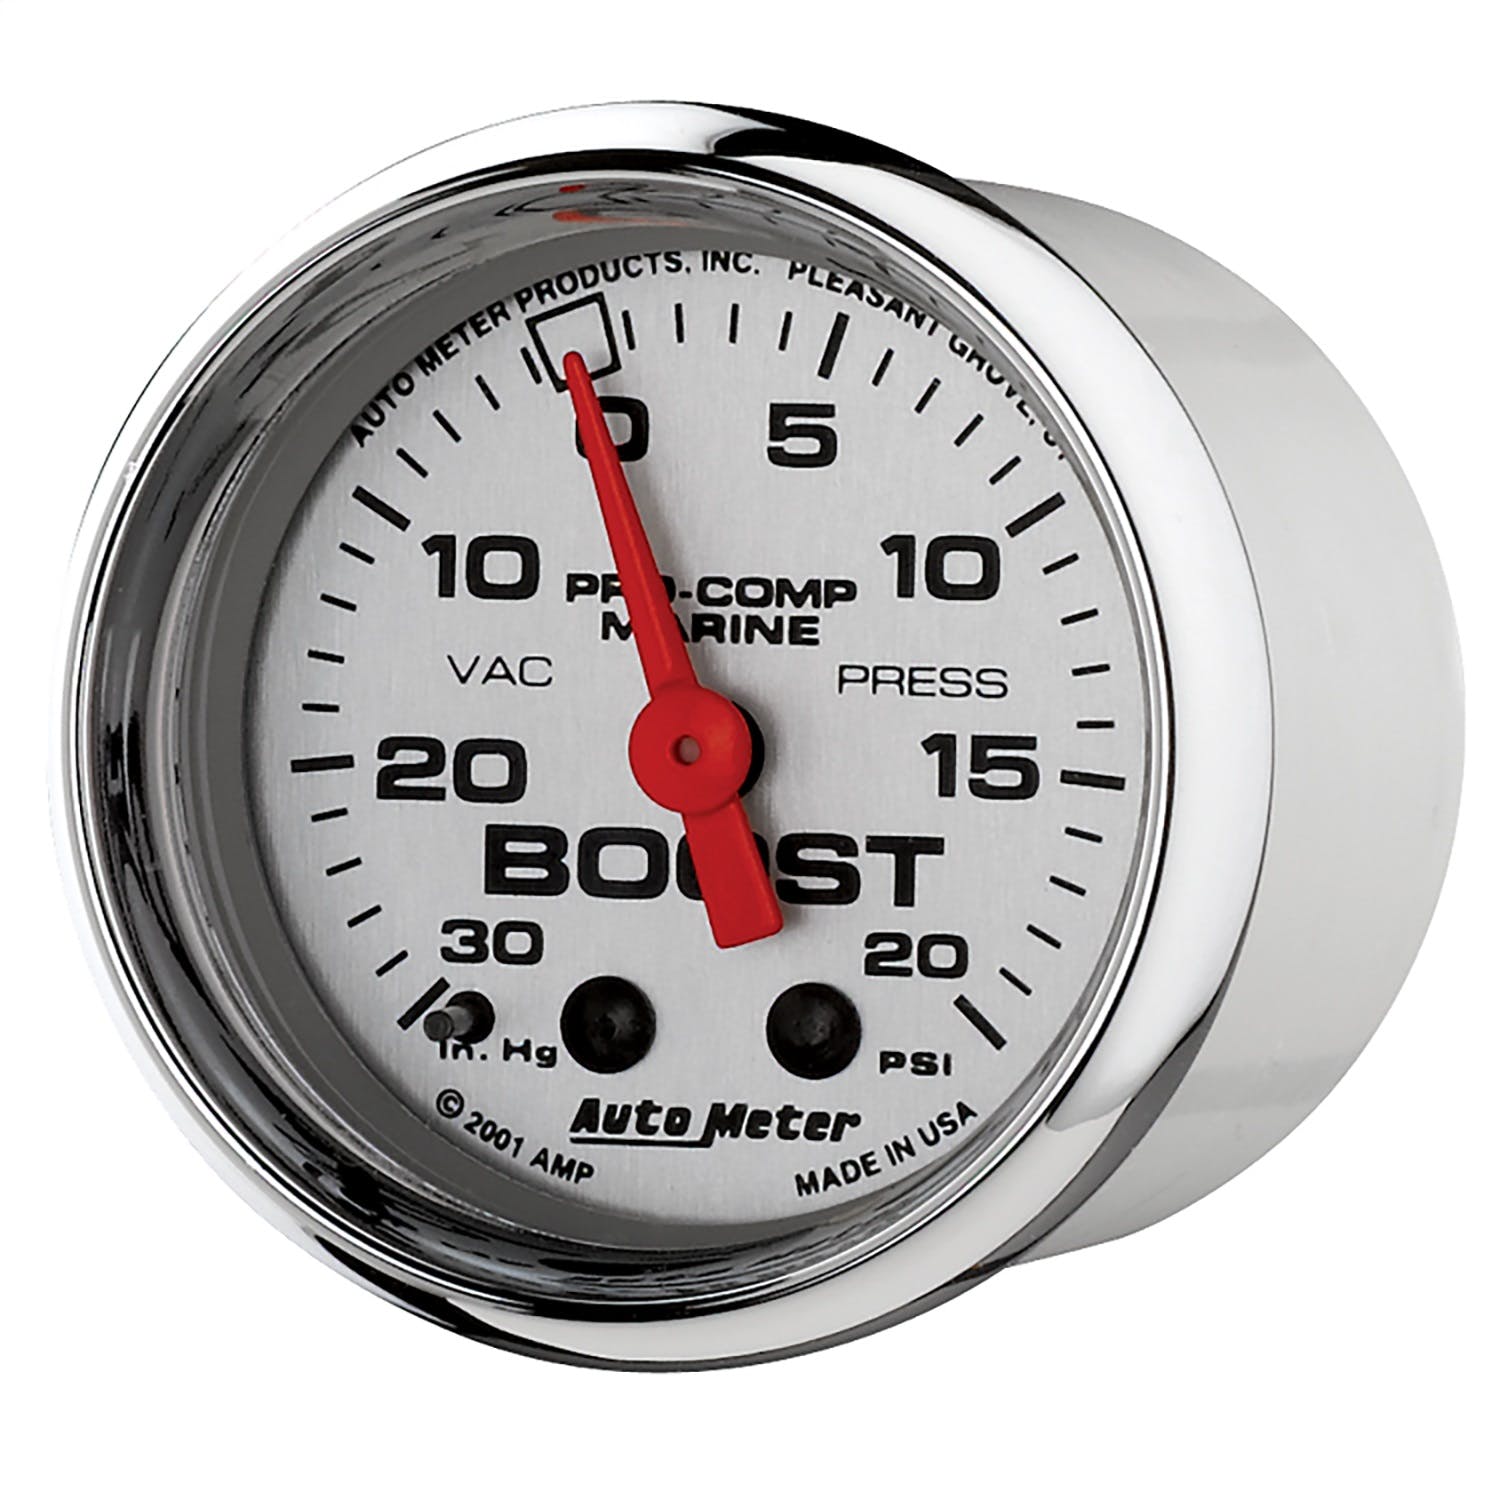 AutoMeter Products 200774-35 Vacuum/Boost Gauge, Mechanical-Marine Chrome 2 1/16, 30INHG-20PSI